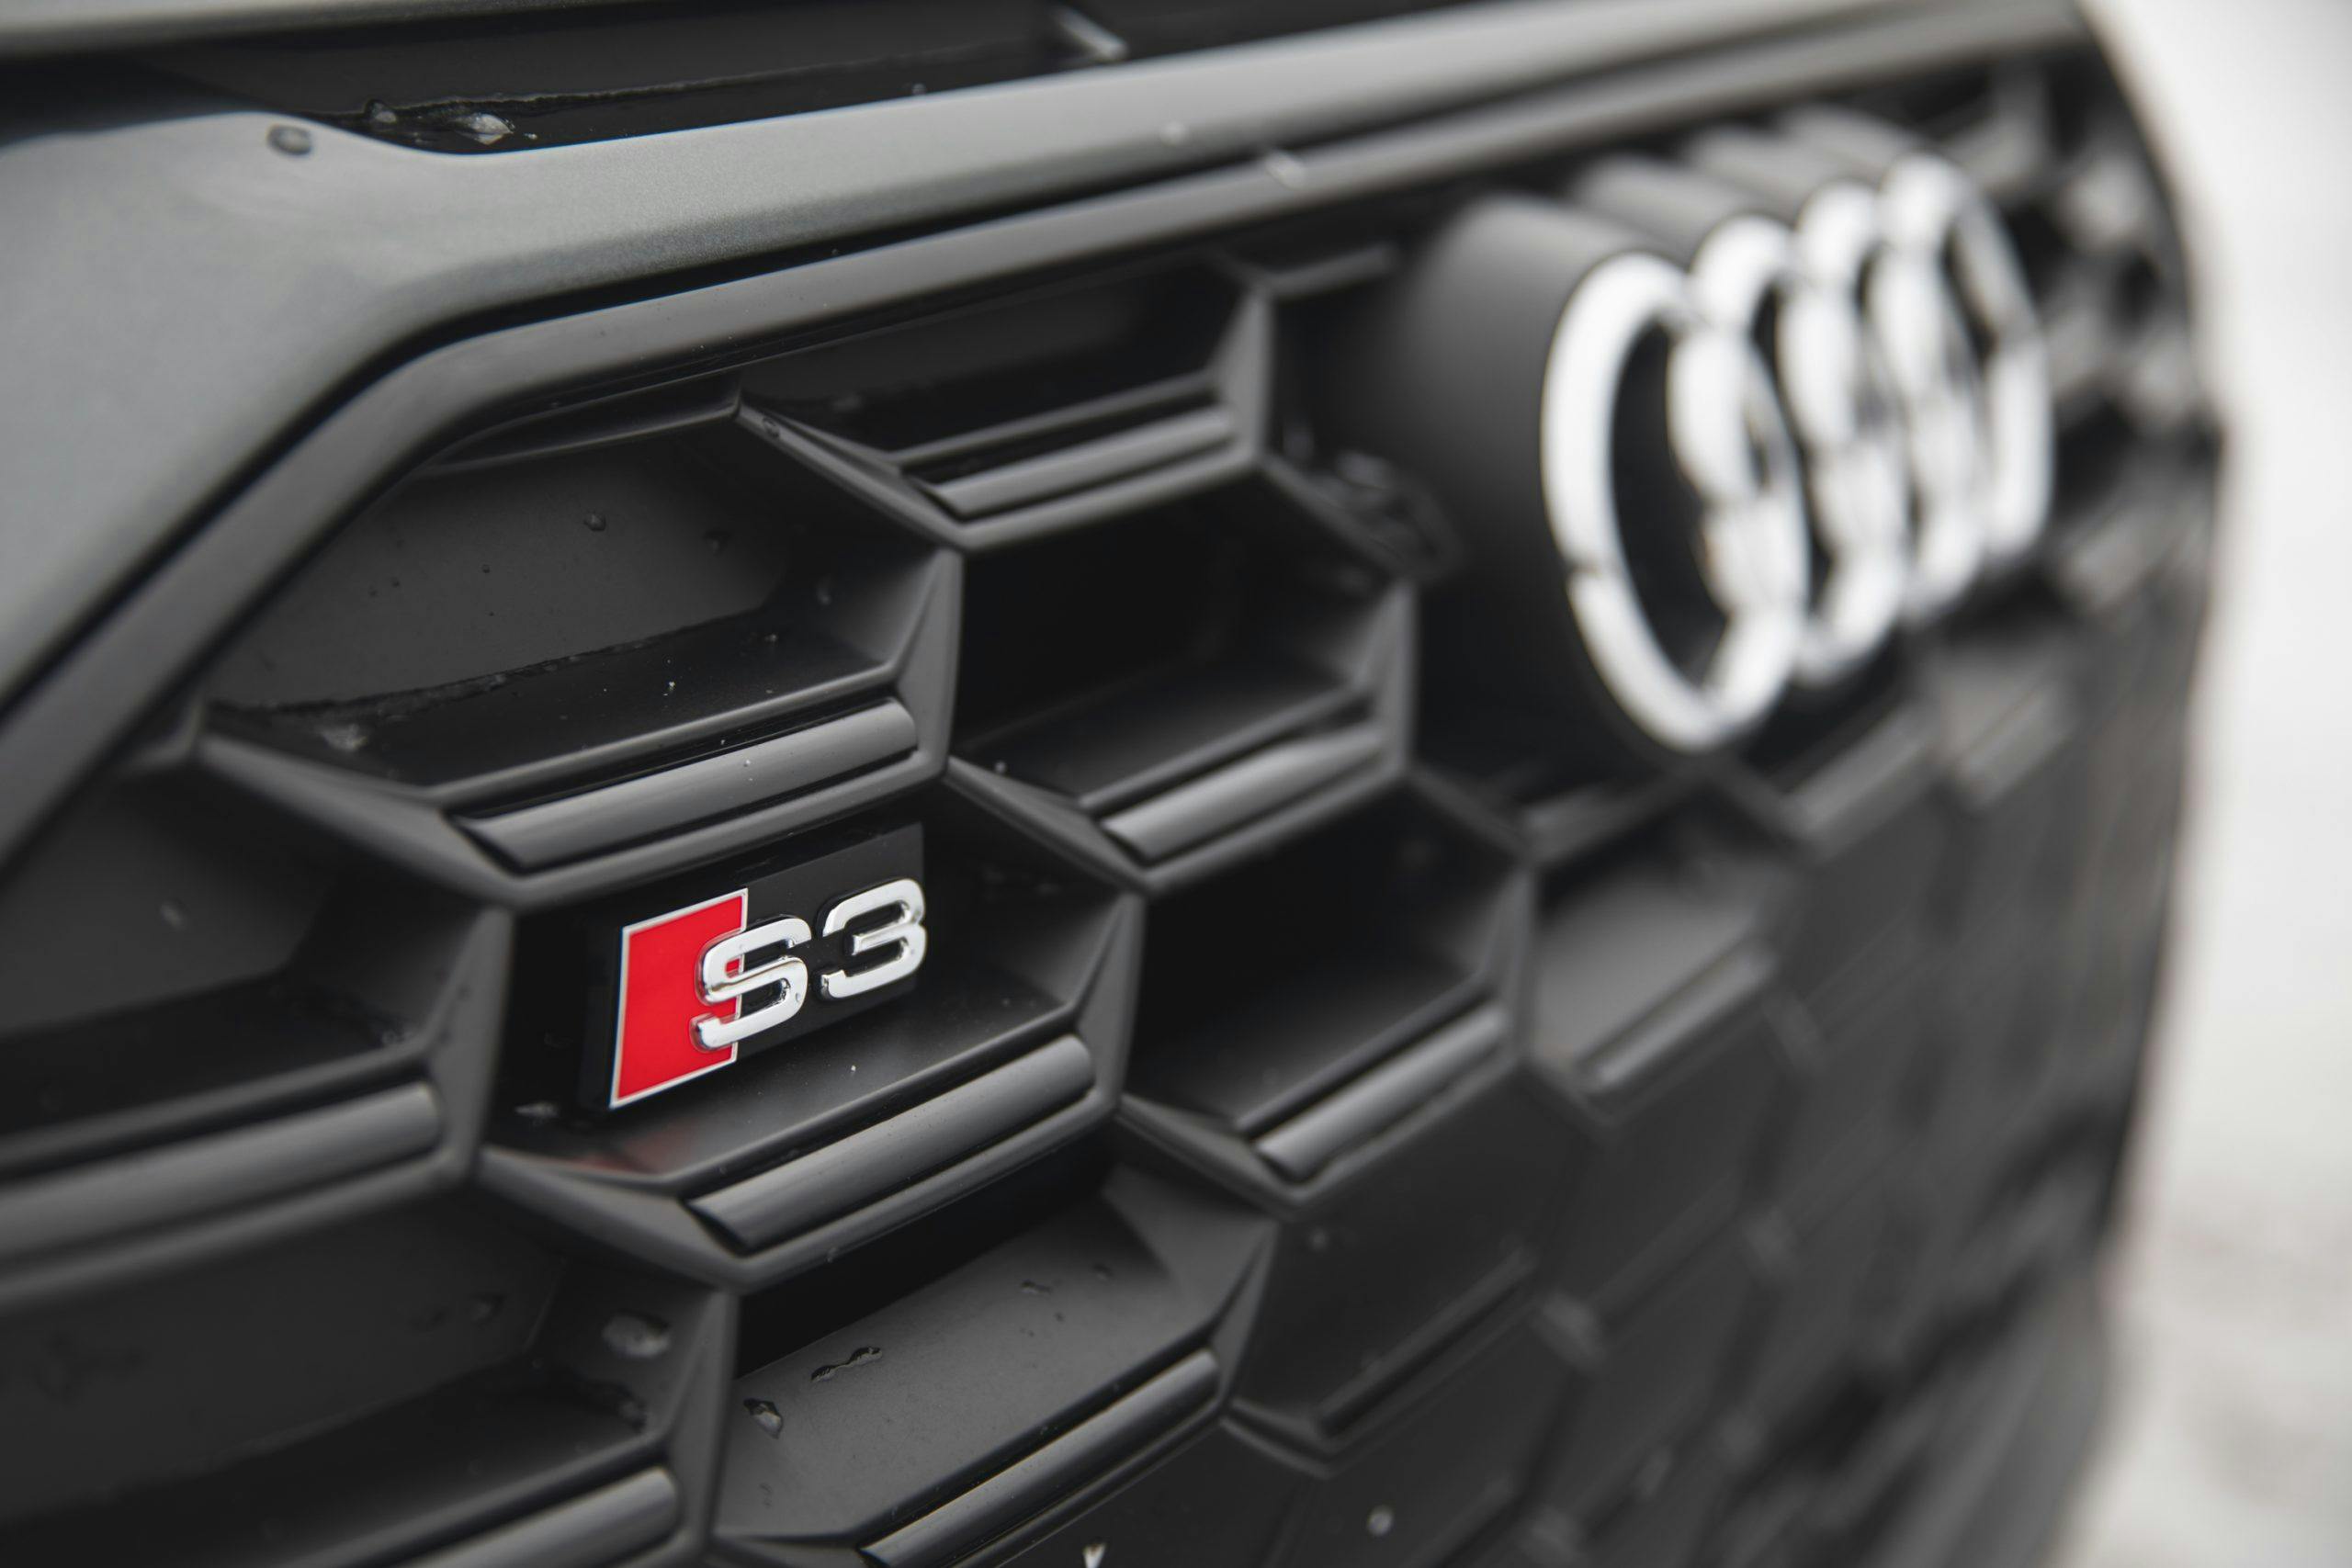 2022 Audi S3 front grille badge detail